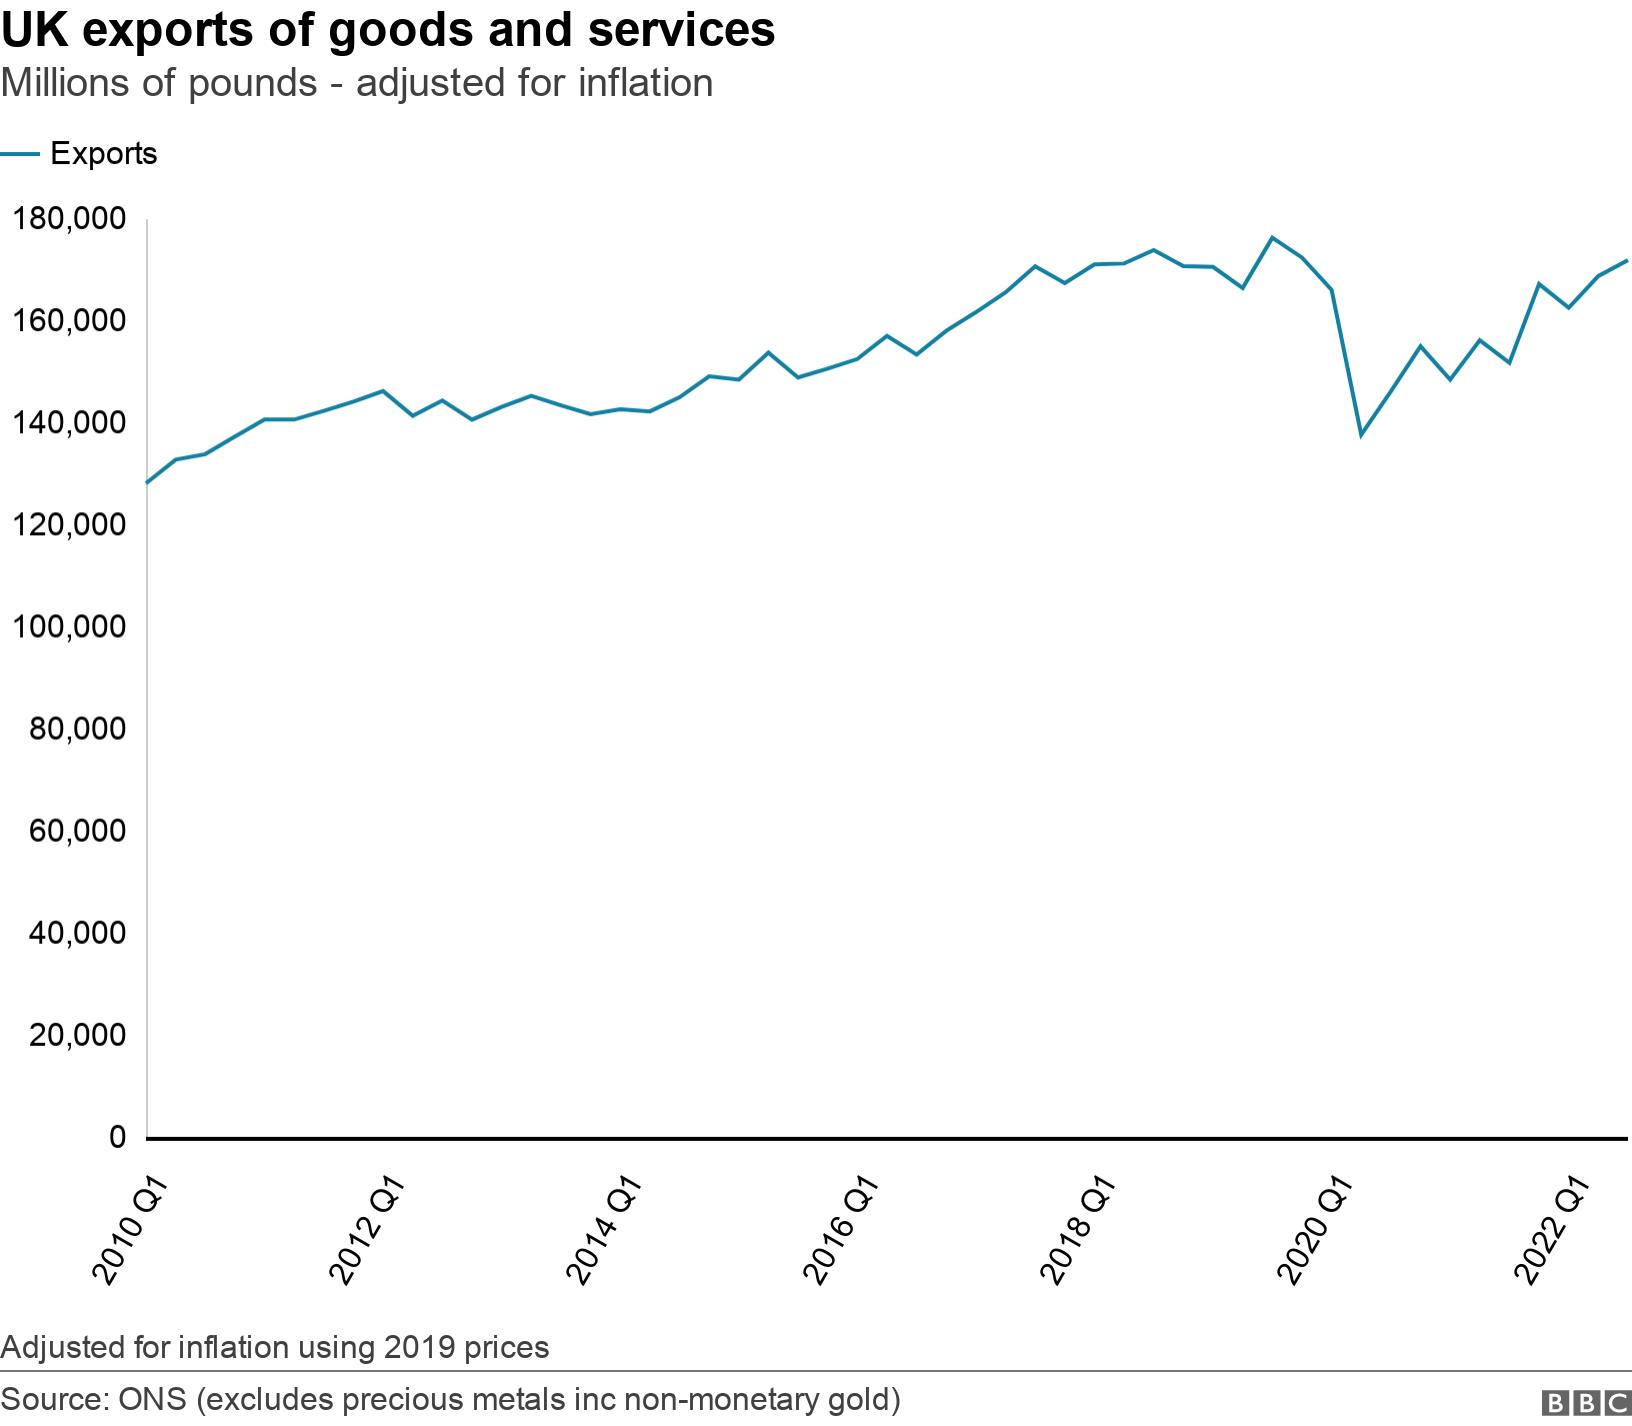 UK exports of goods and services. Millions of pounds - adjusted for inflation.  Adjusted for inflation using 2019 prices.